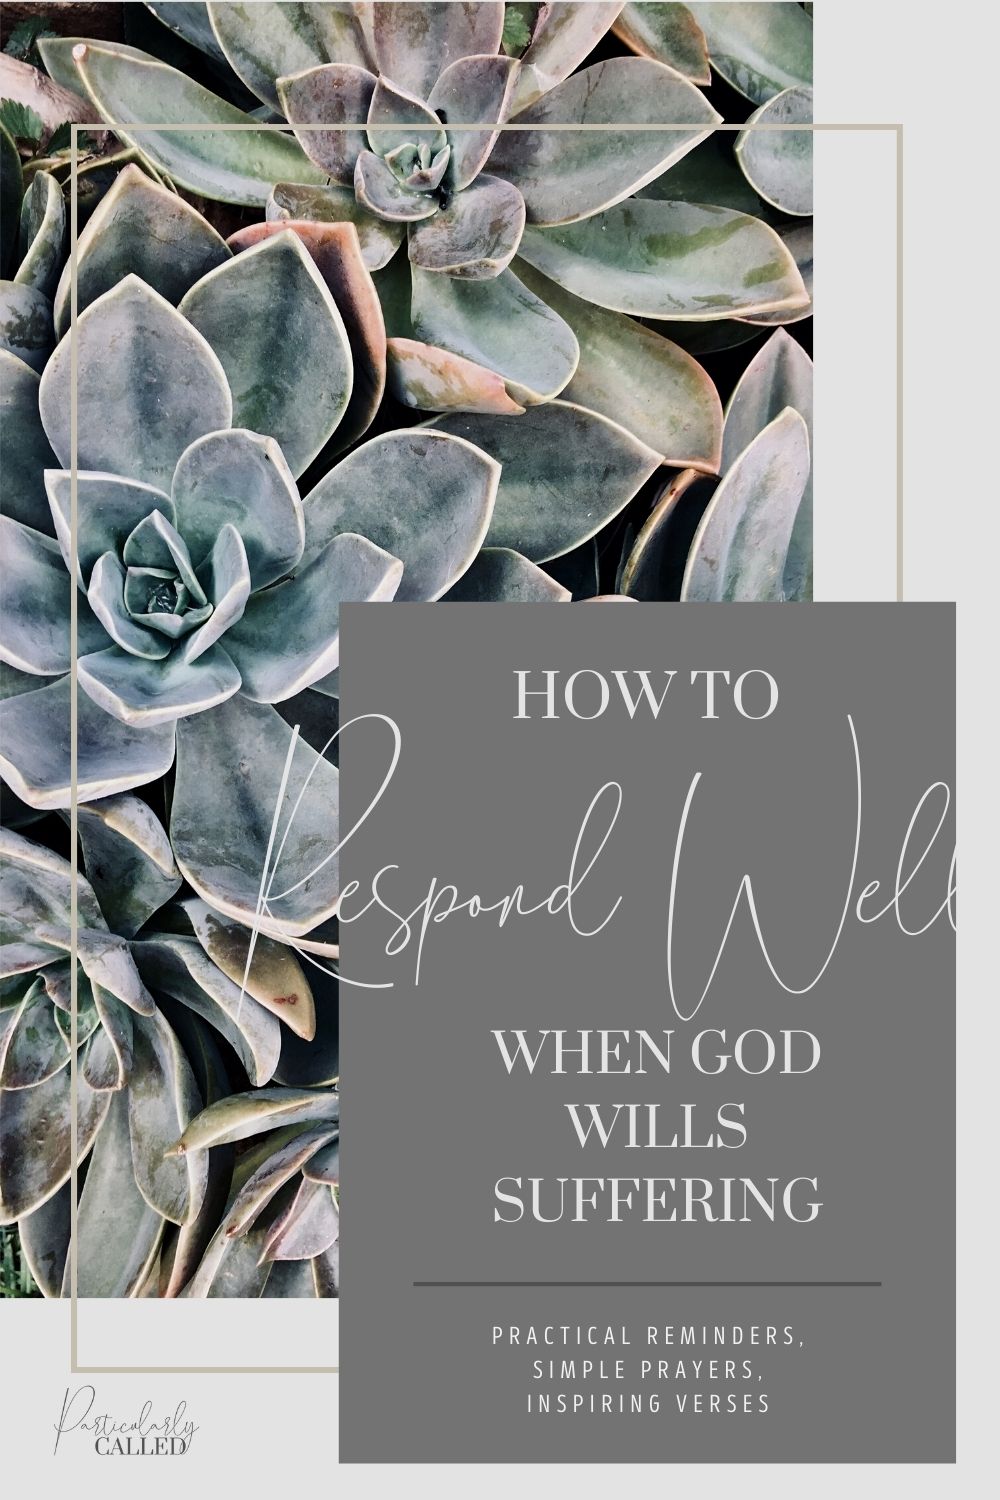 How to Respond when God Wills Suffering